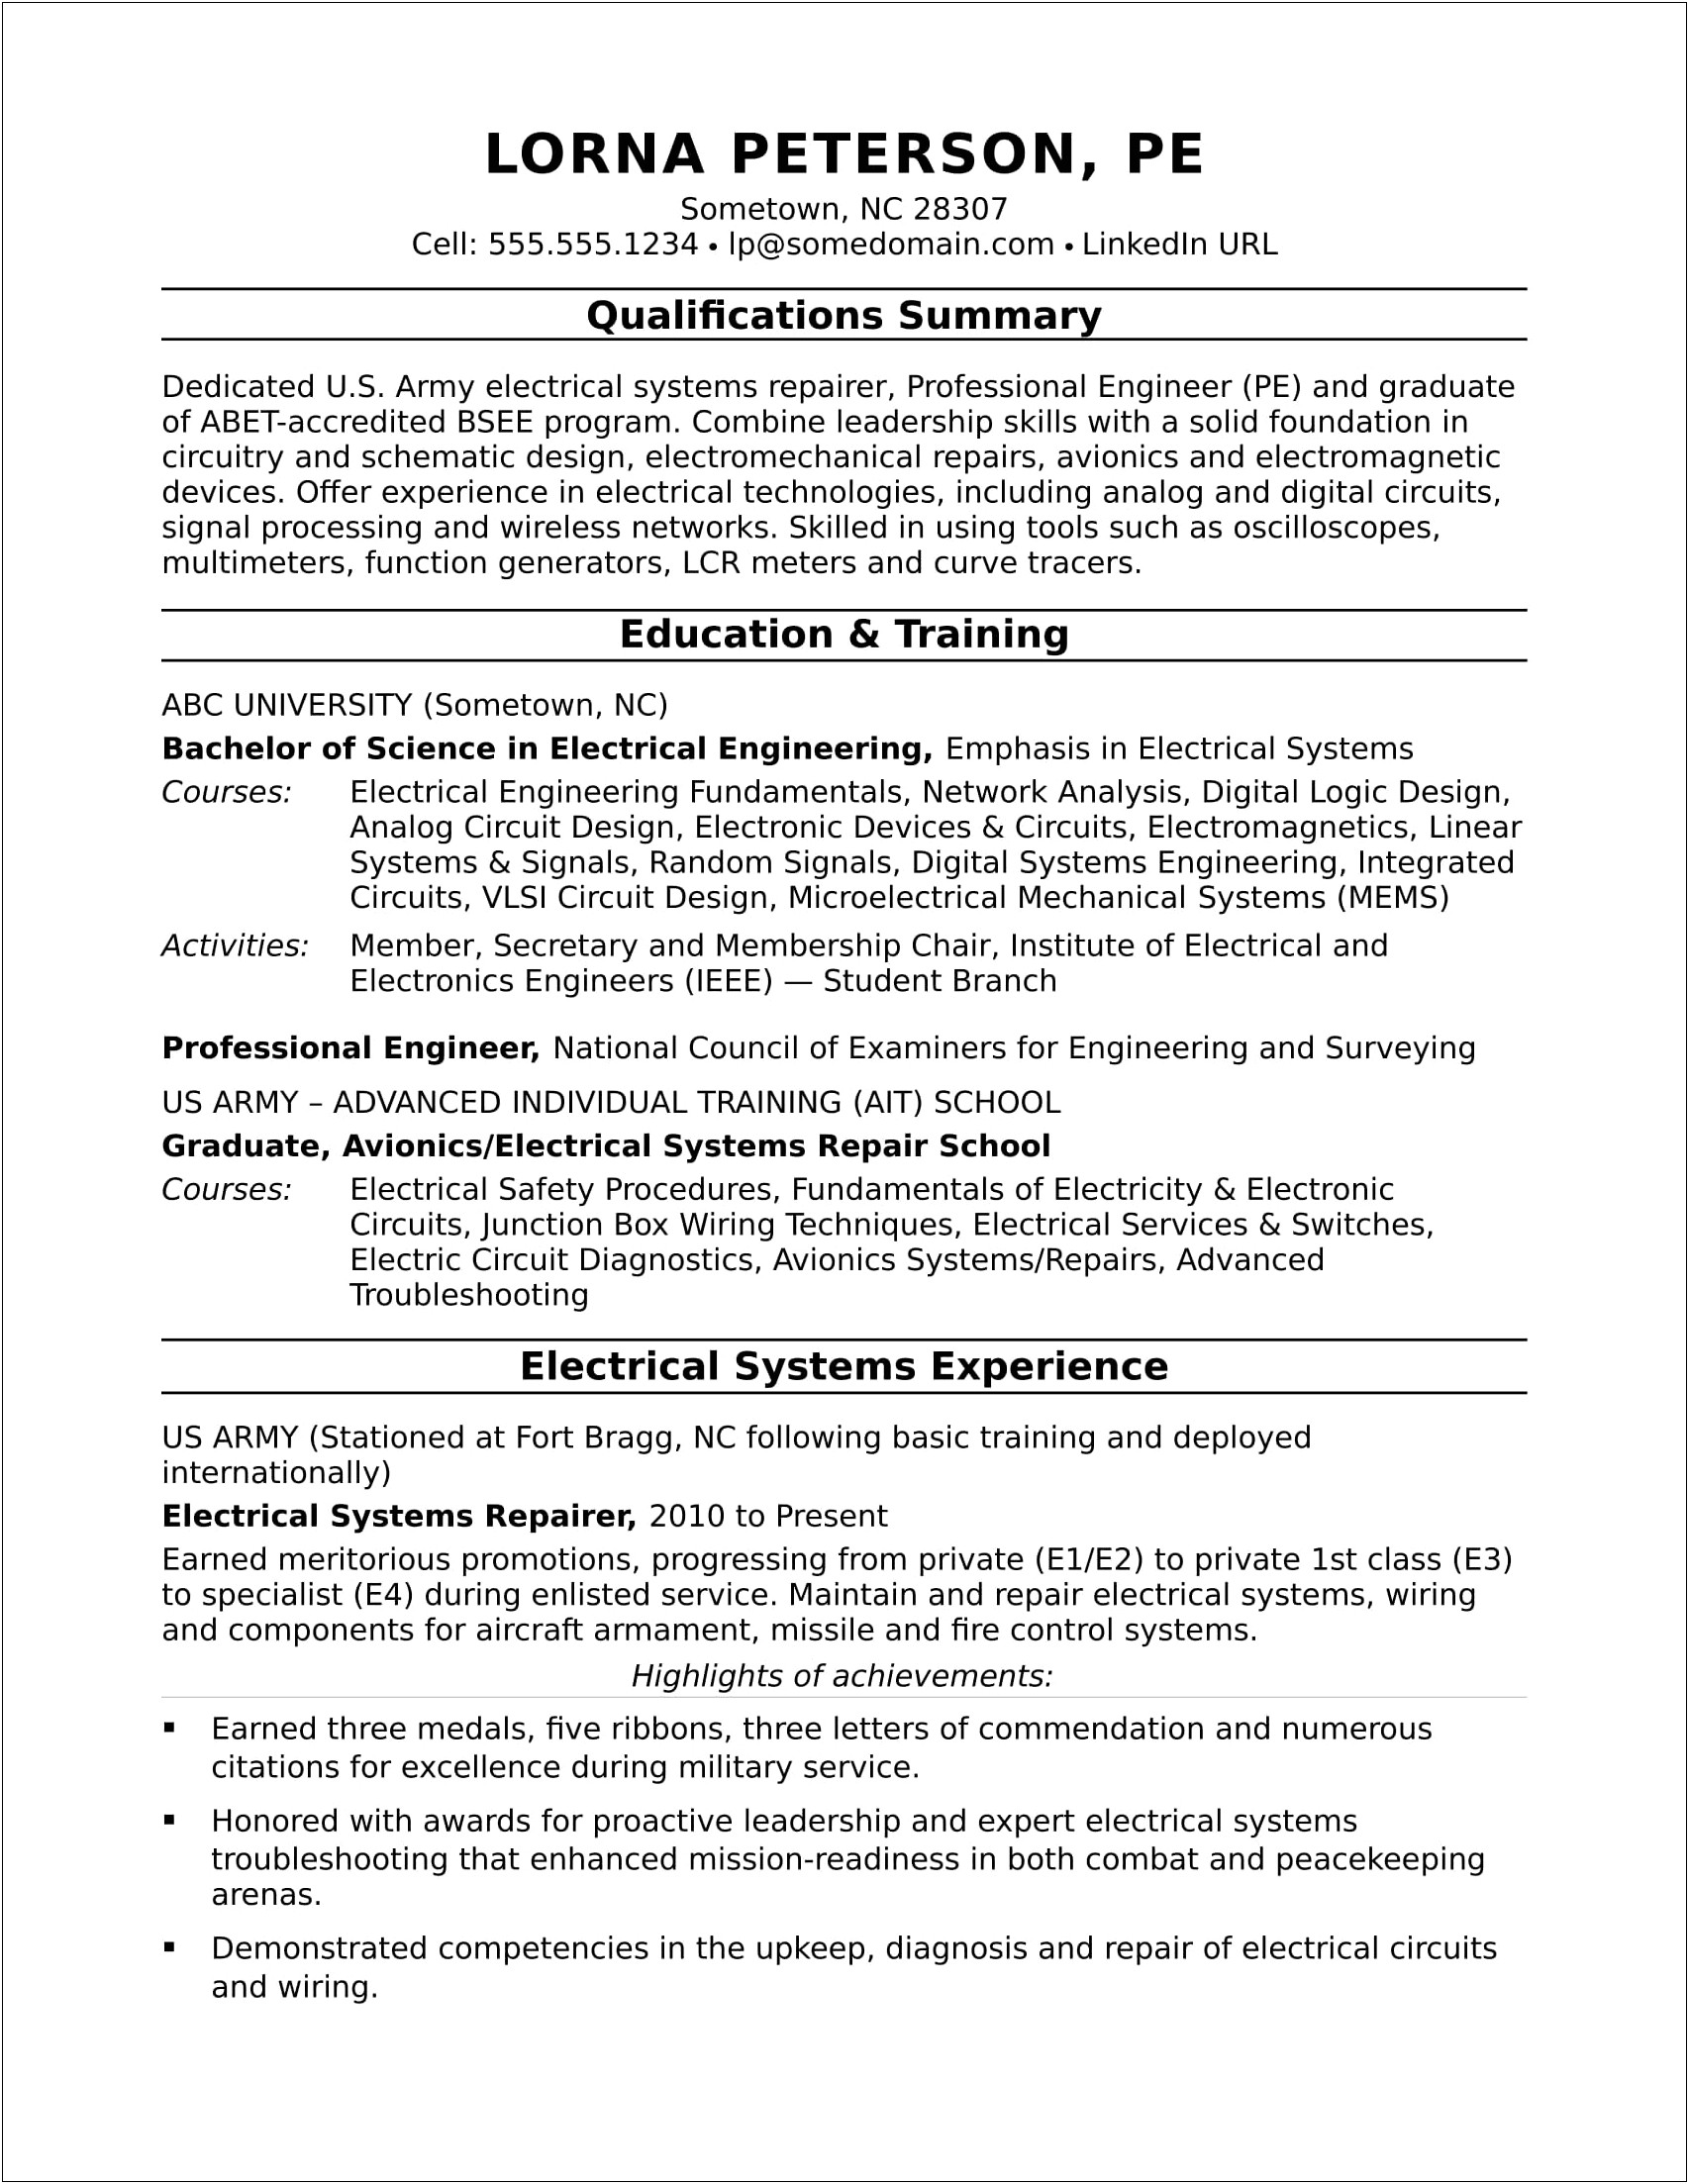 Resume Objective Samples For Electrical Engineer